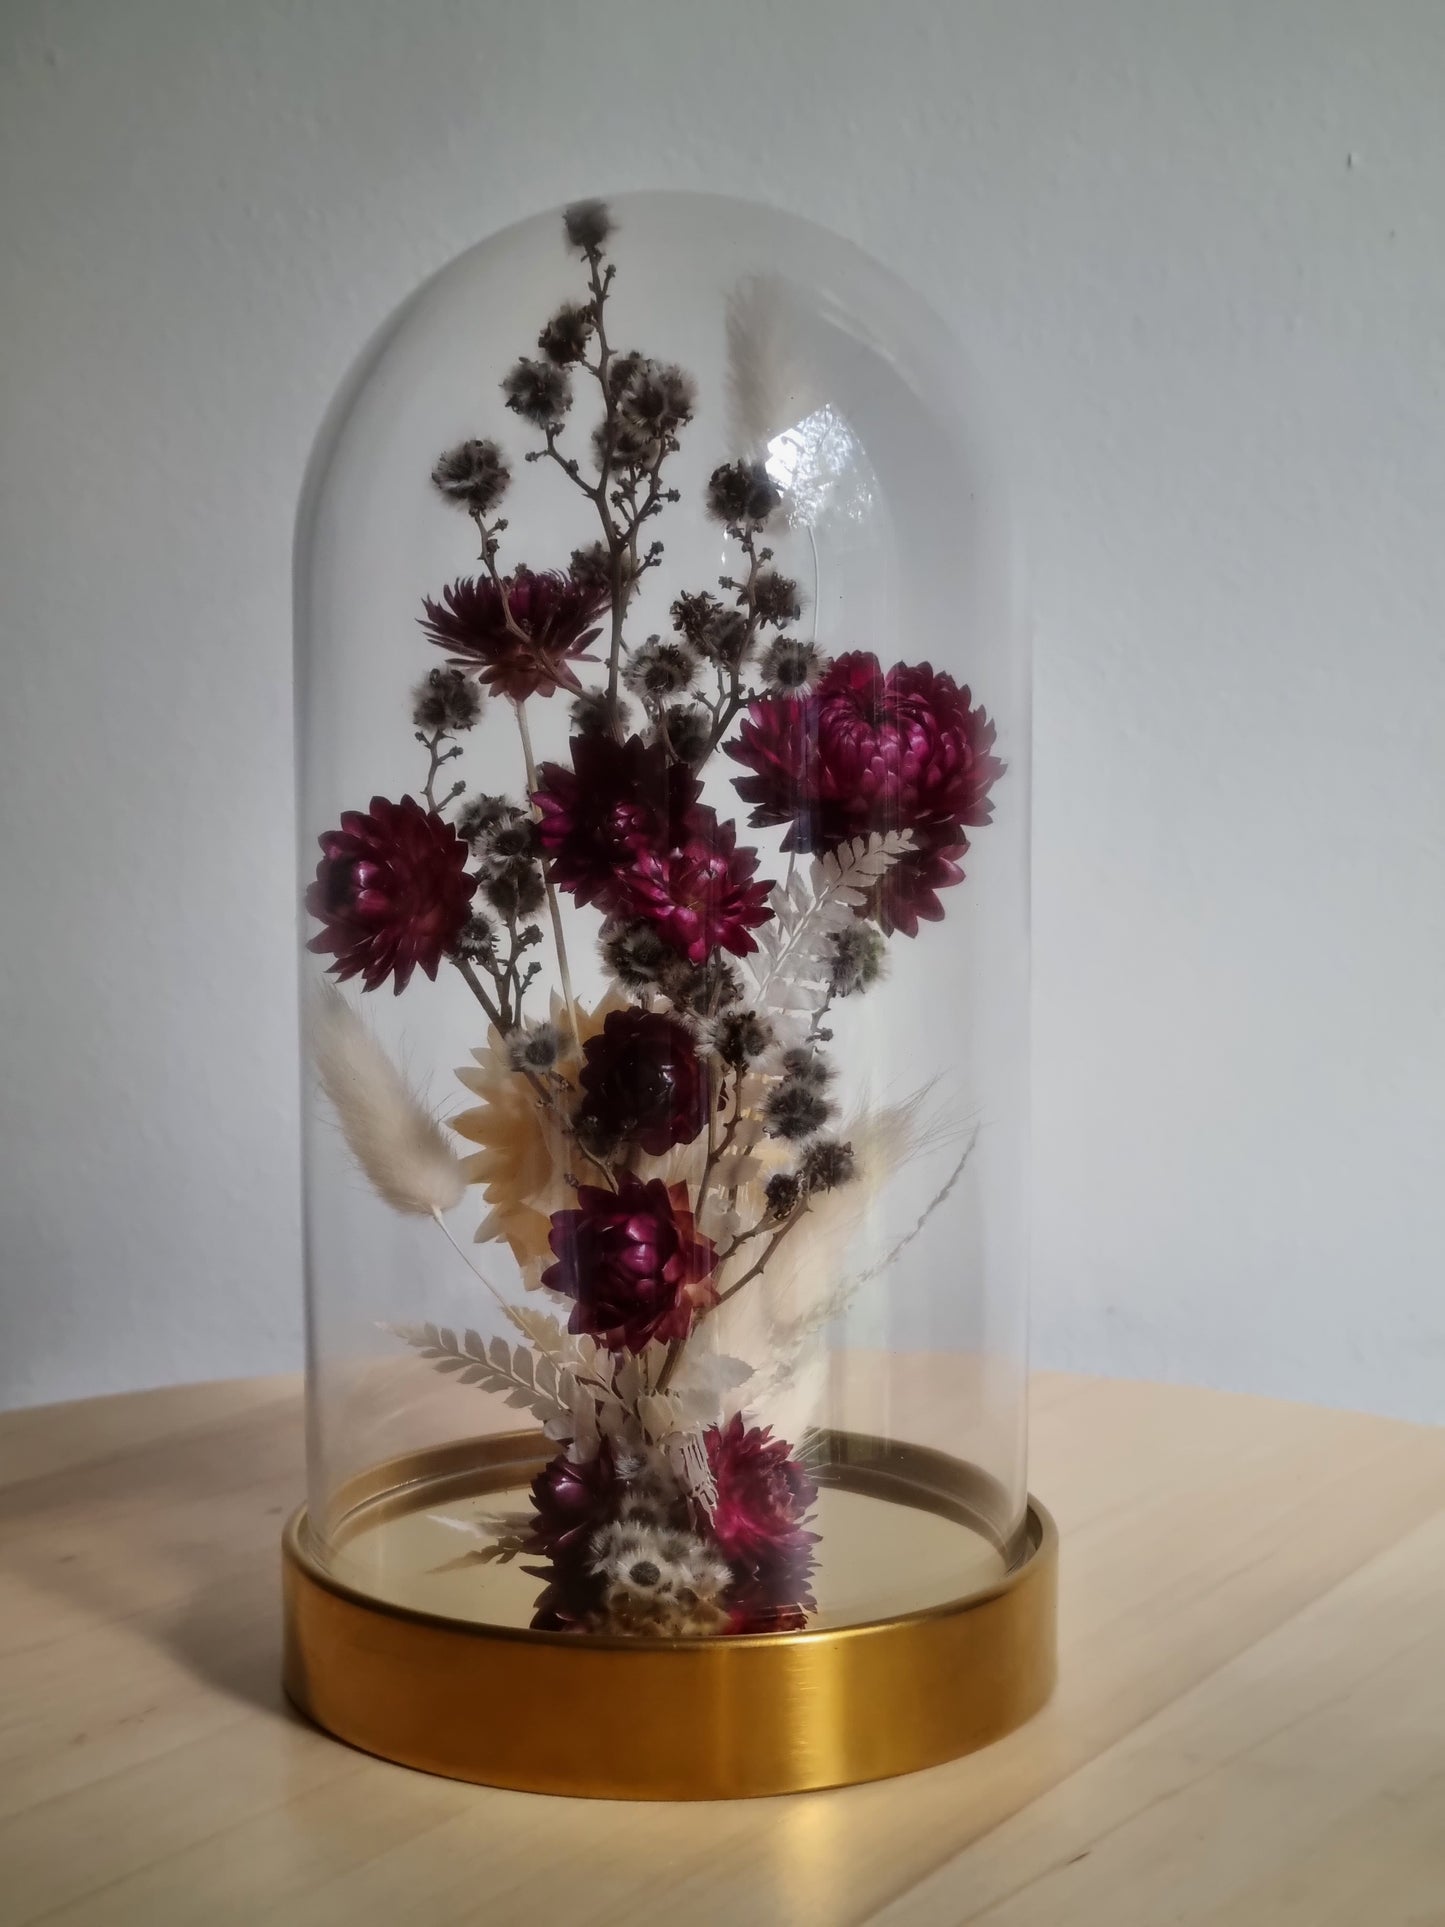 19cm glass dome with golden base featuring dried and preserved flowers in dark berry, grey and white.